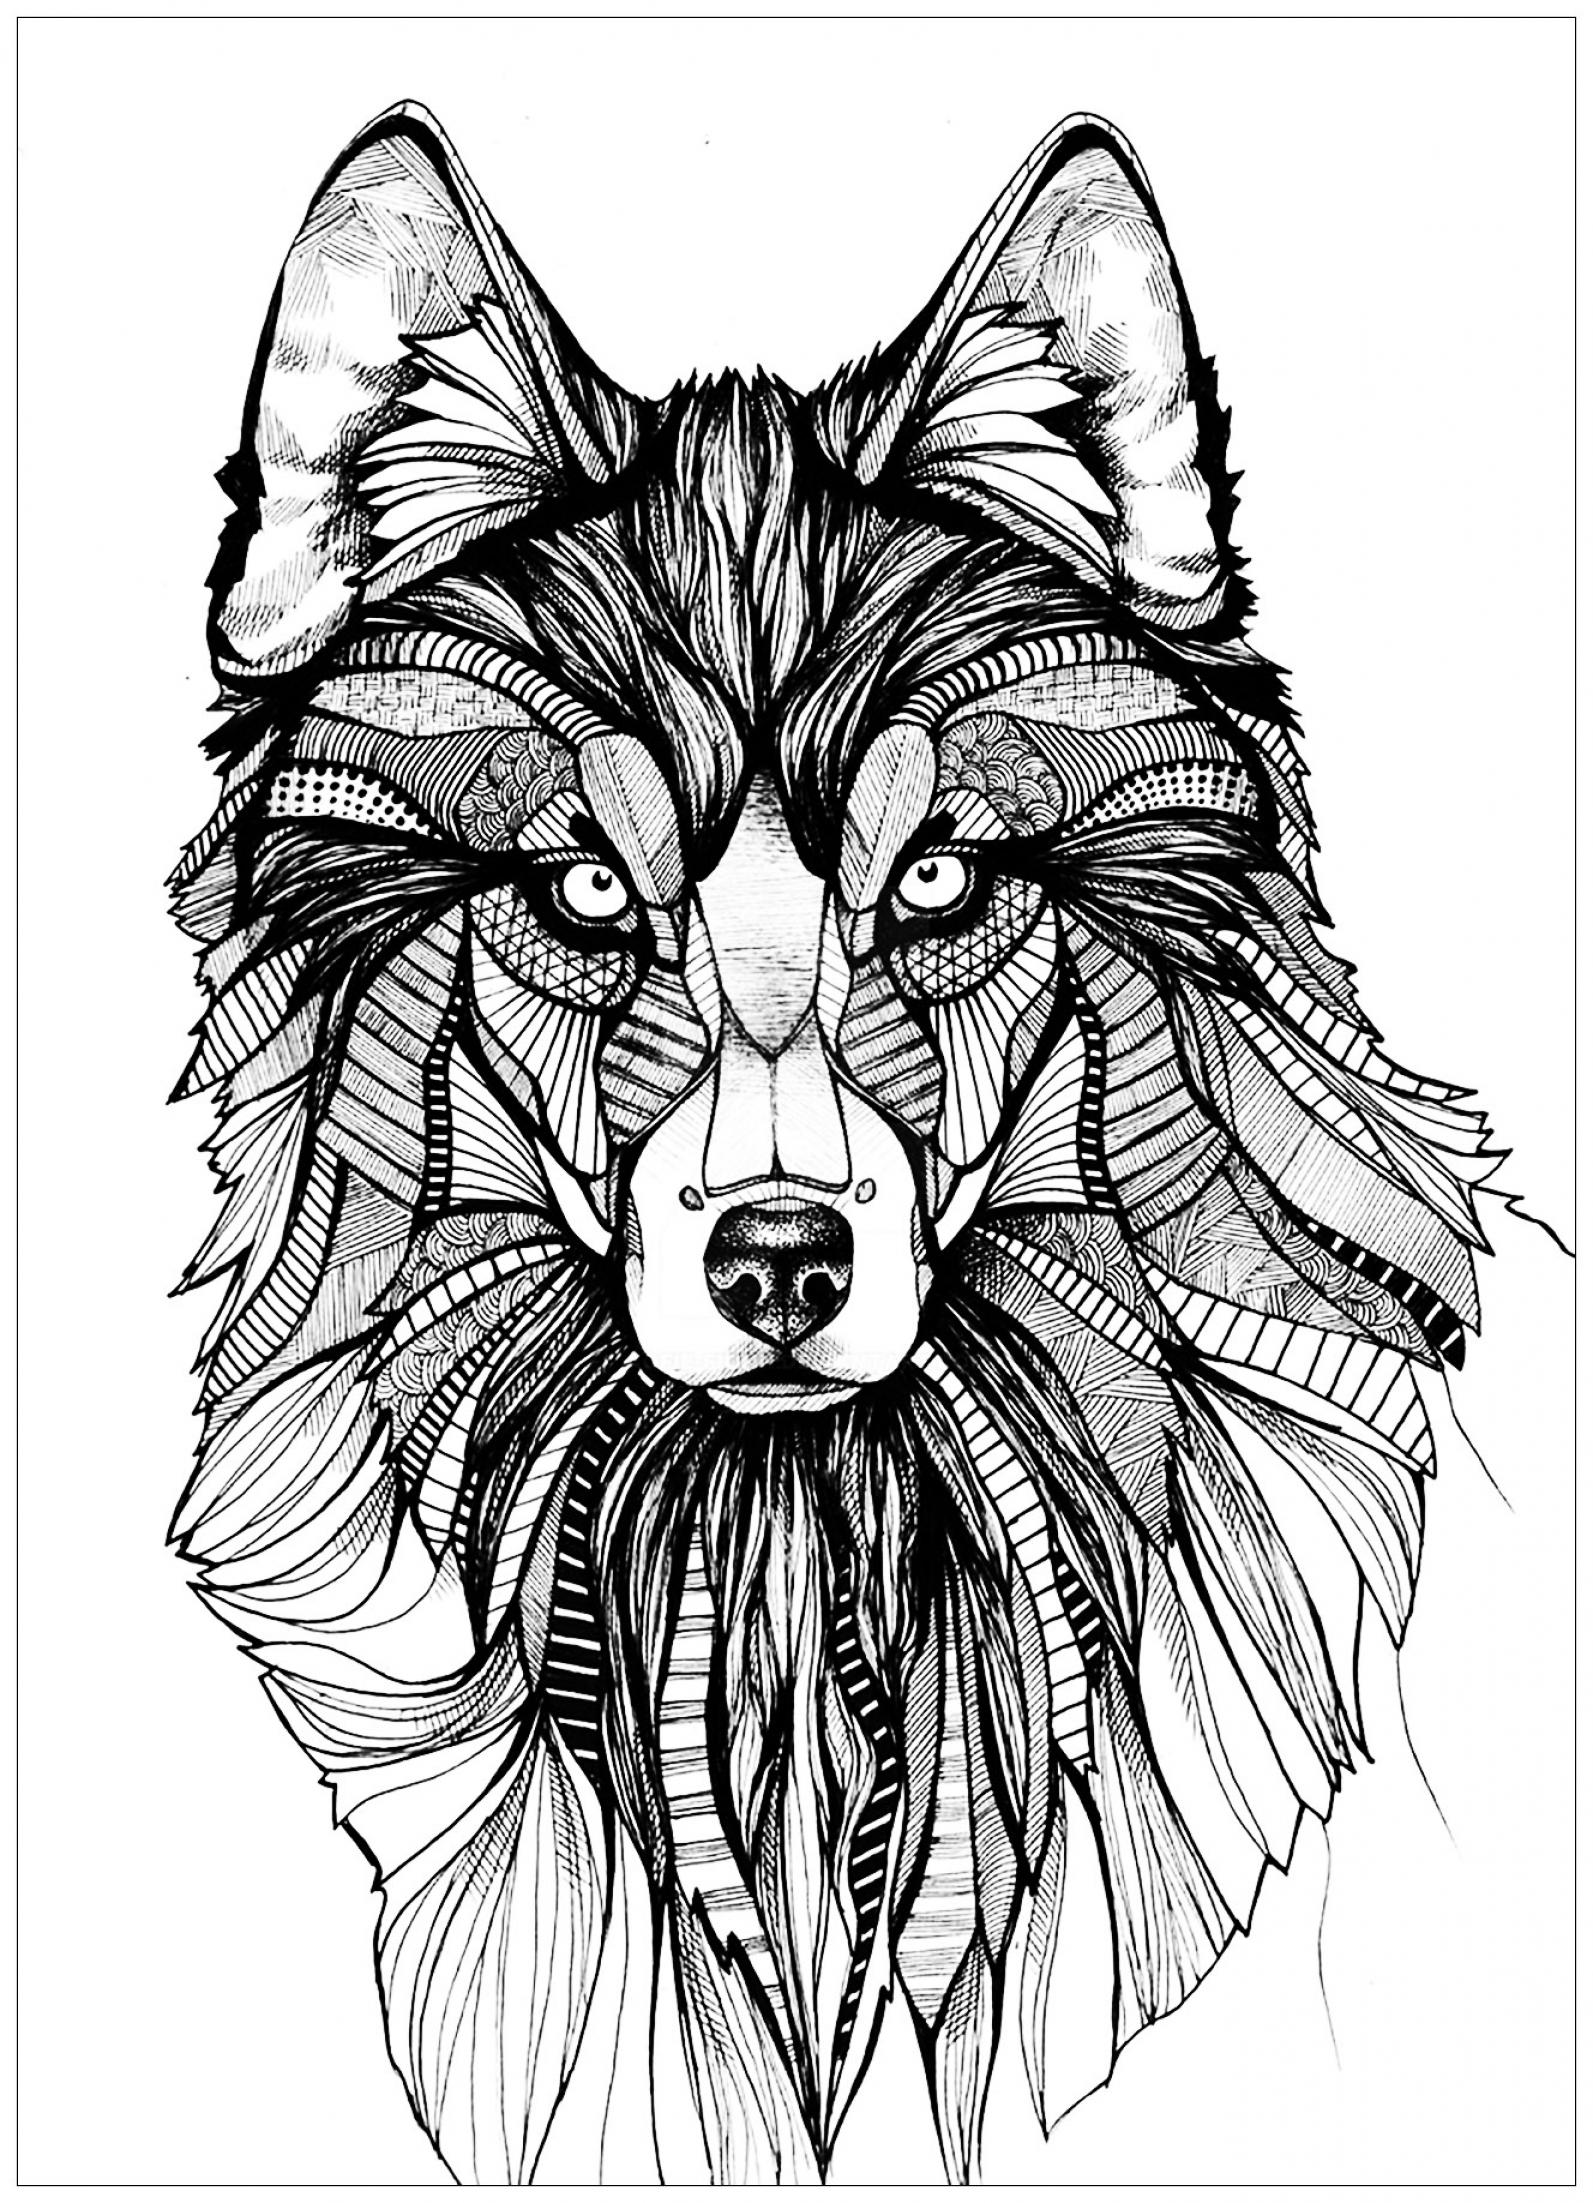 Wolf Coloring Pages for Adults and Kids - SheetalColor.com